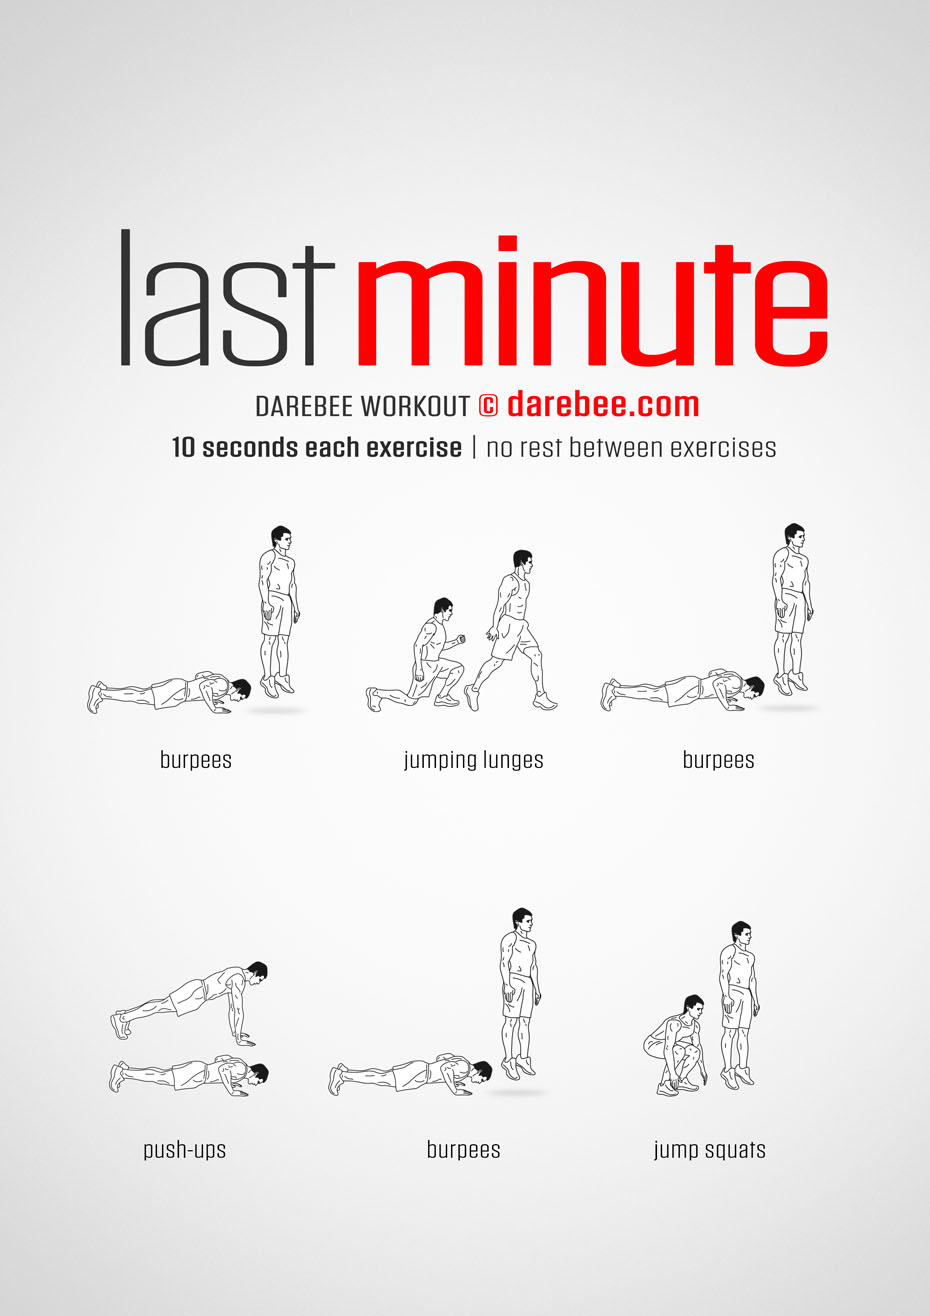 Minute Workout